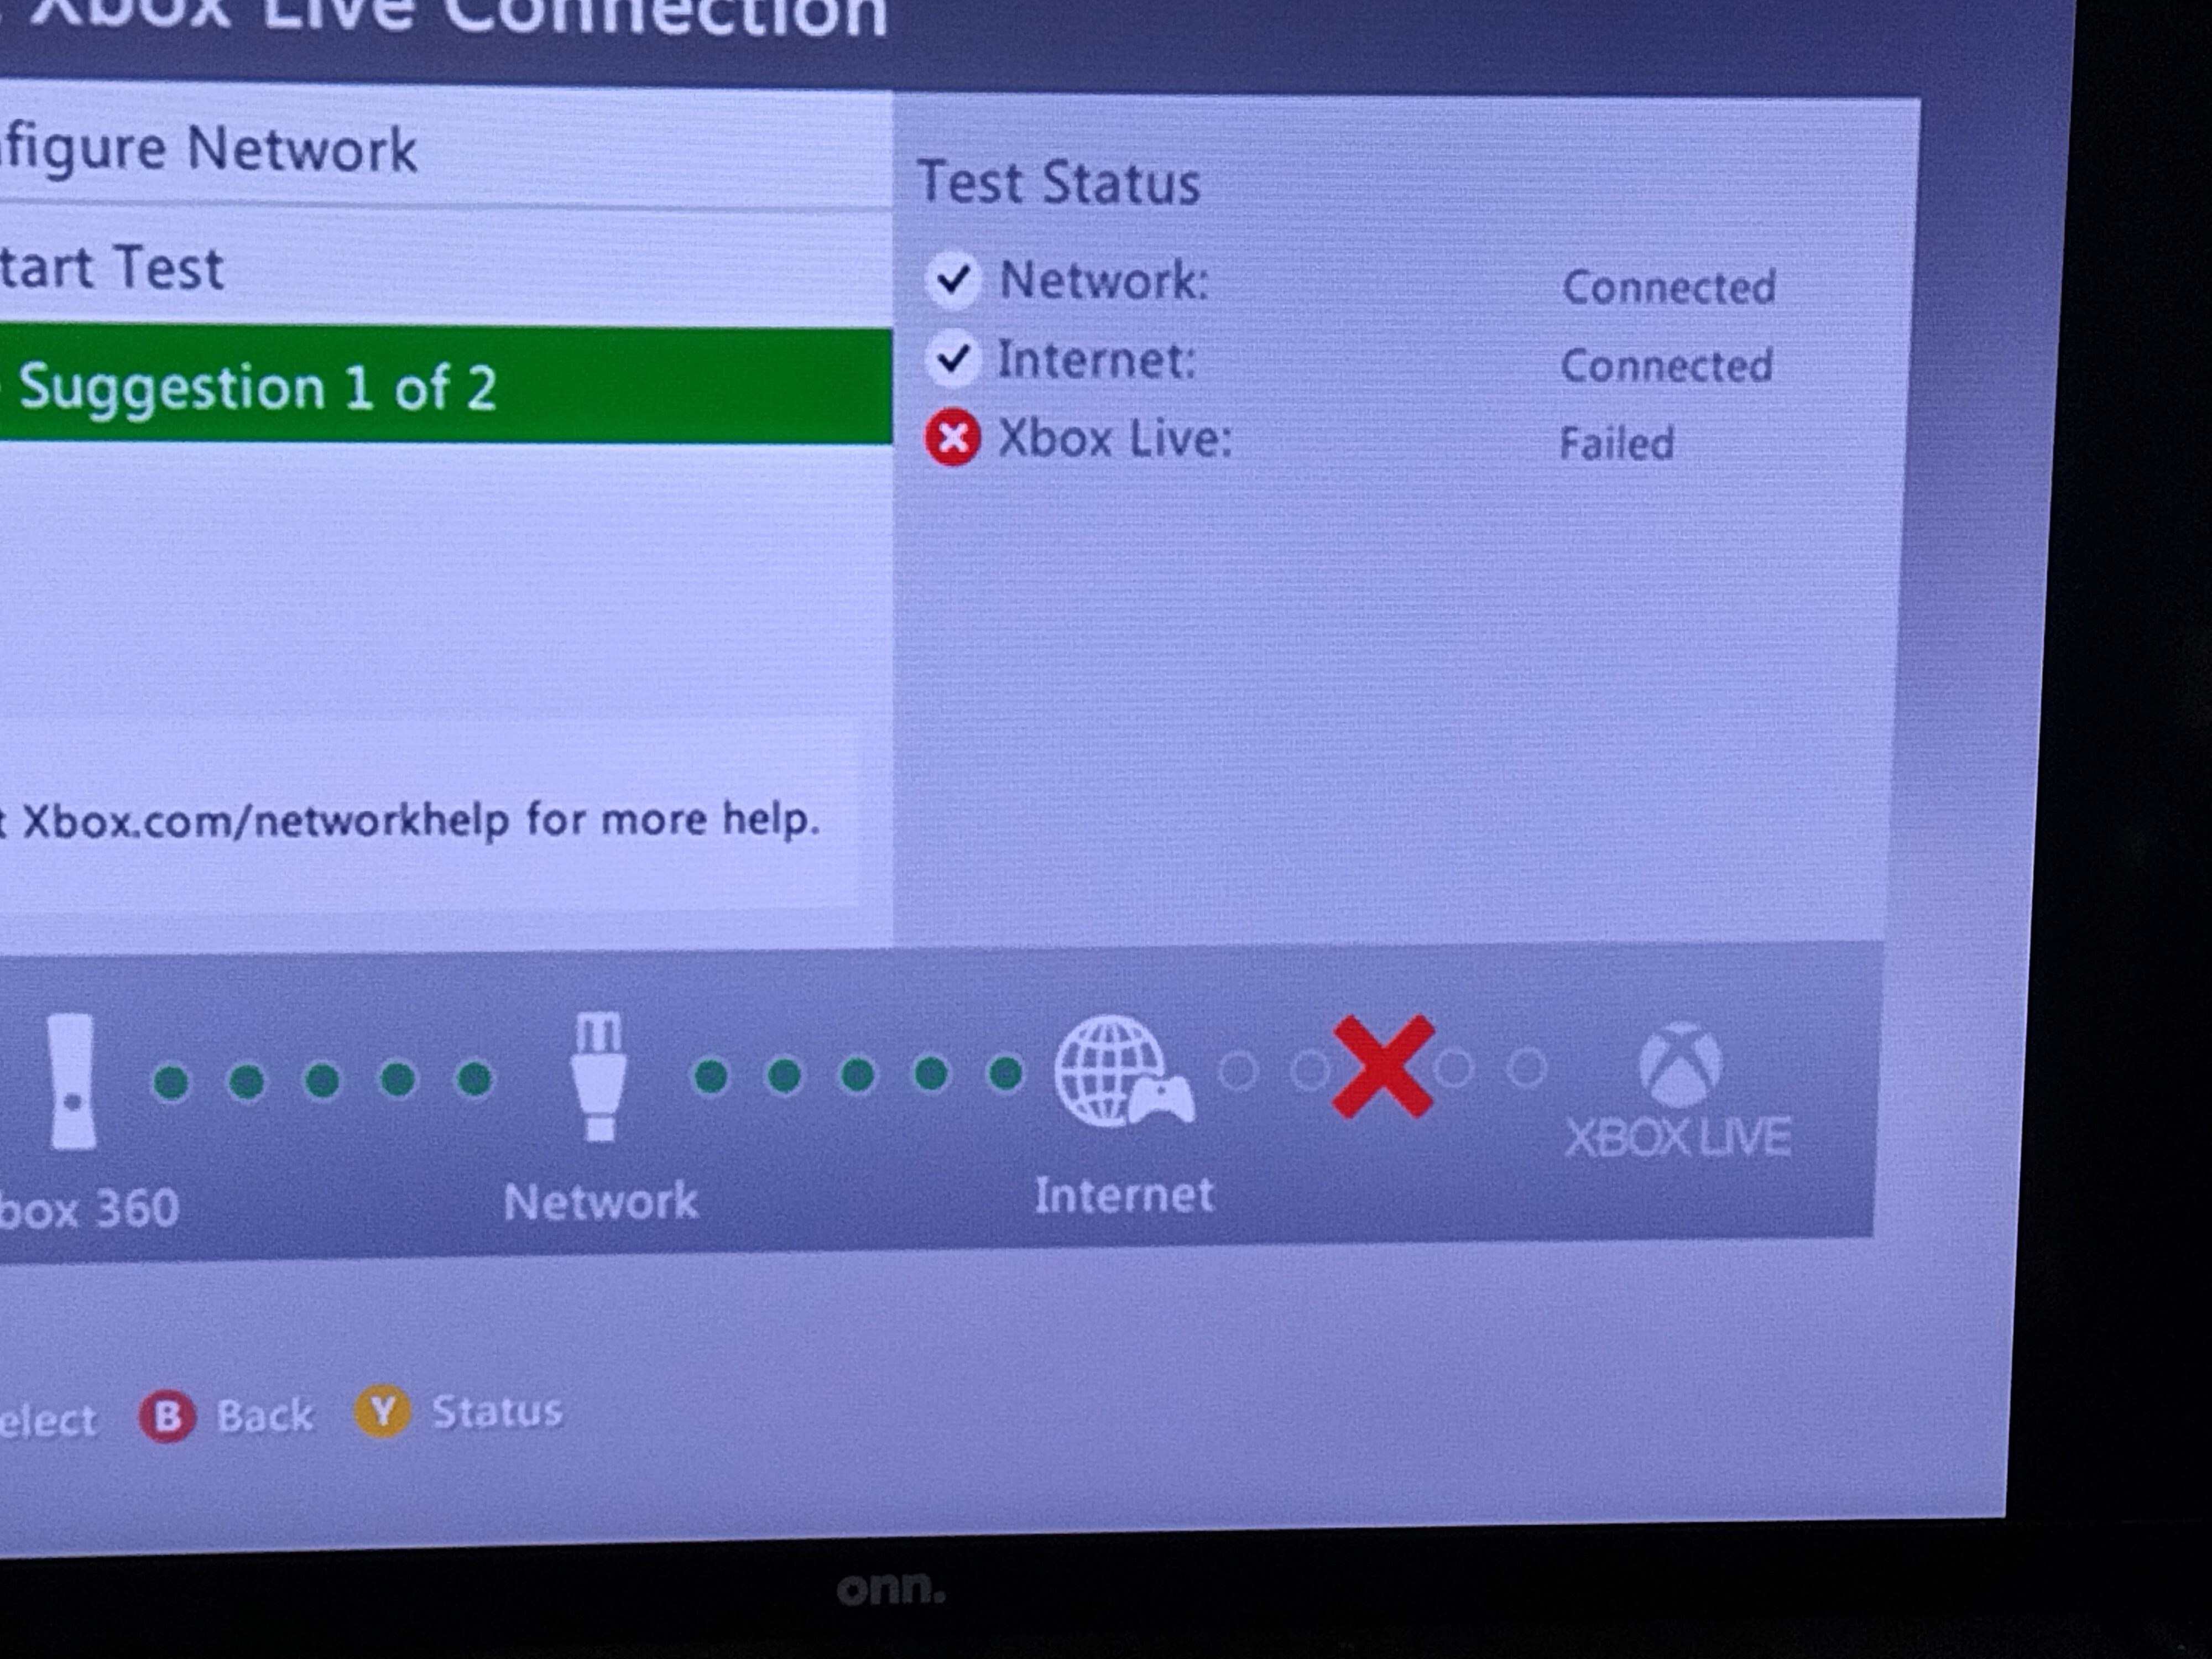 Xbox Live Error 8015190E, Your console can't connect to Xbox Live